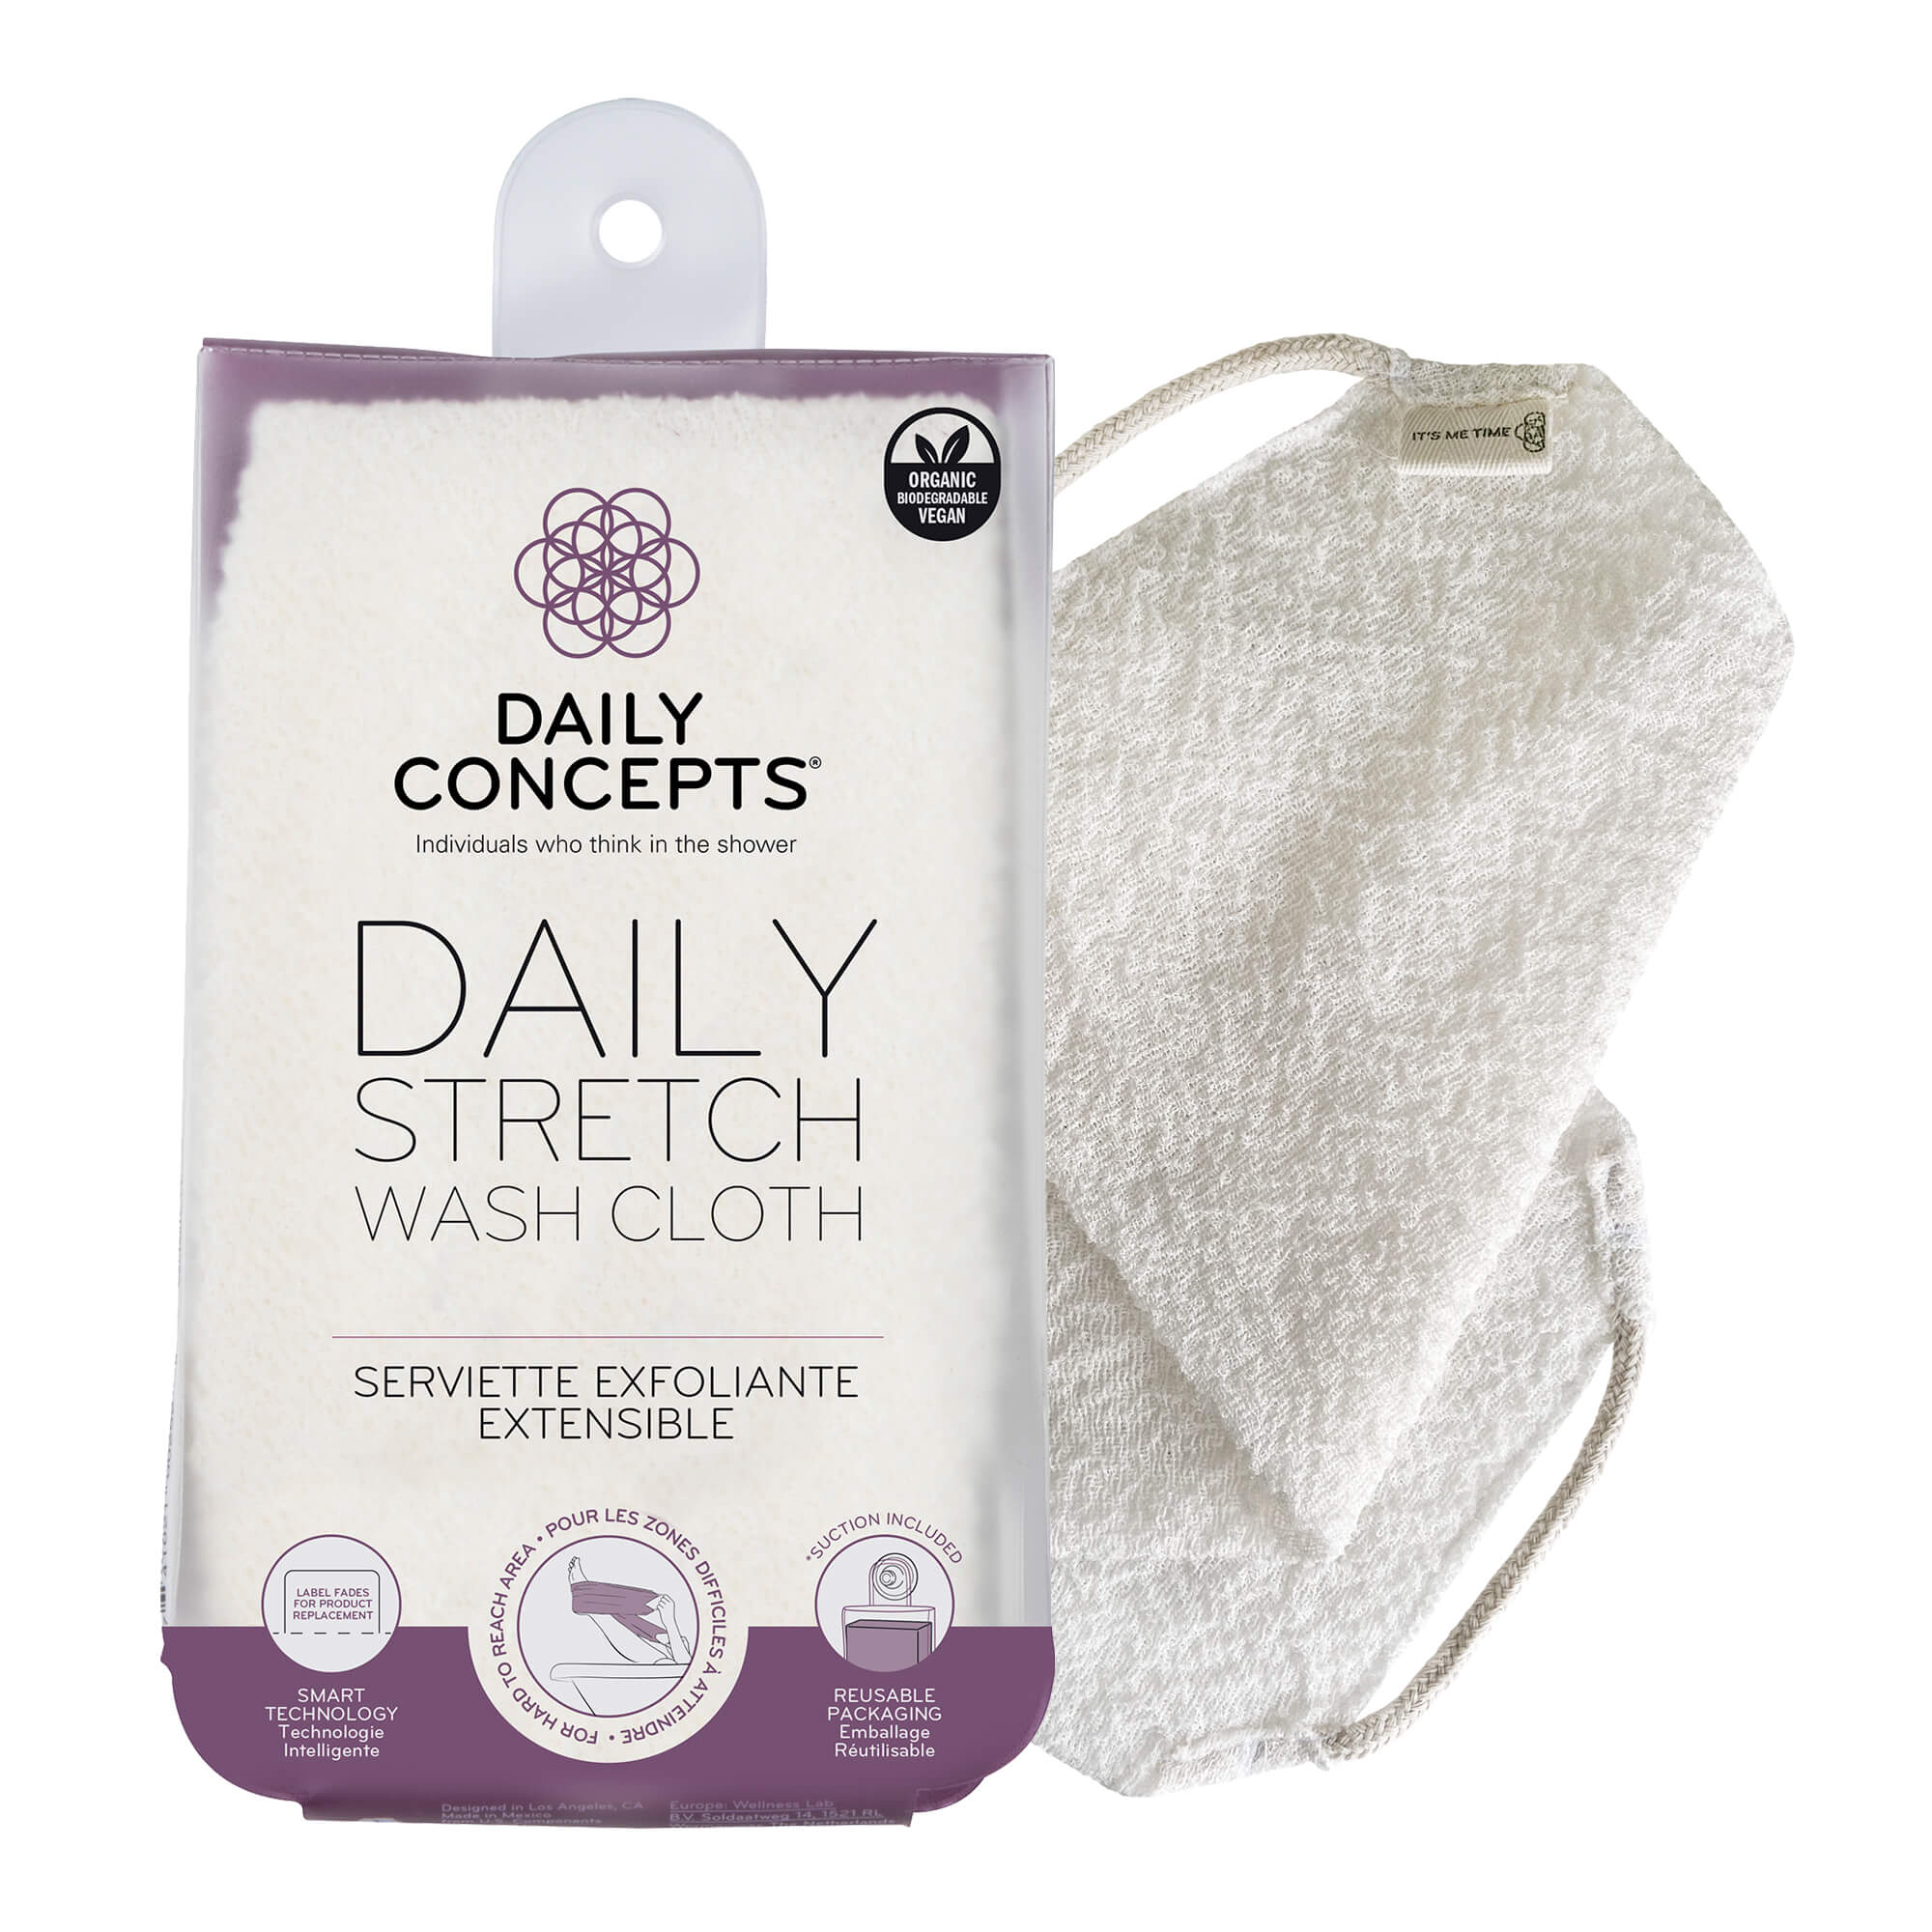 Daily Stretch Wash Cloth by Daily Concepts luxury Spa goods – DAILY CONCEPTS